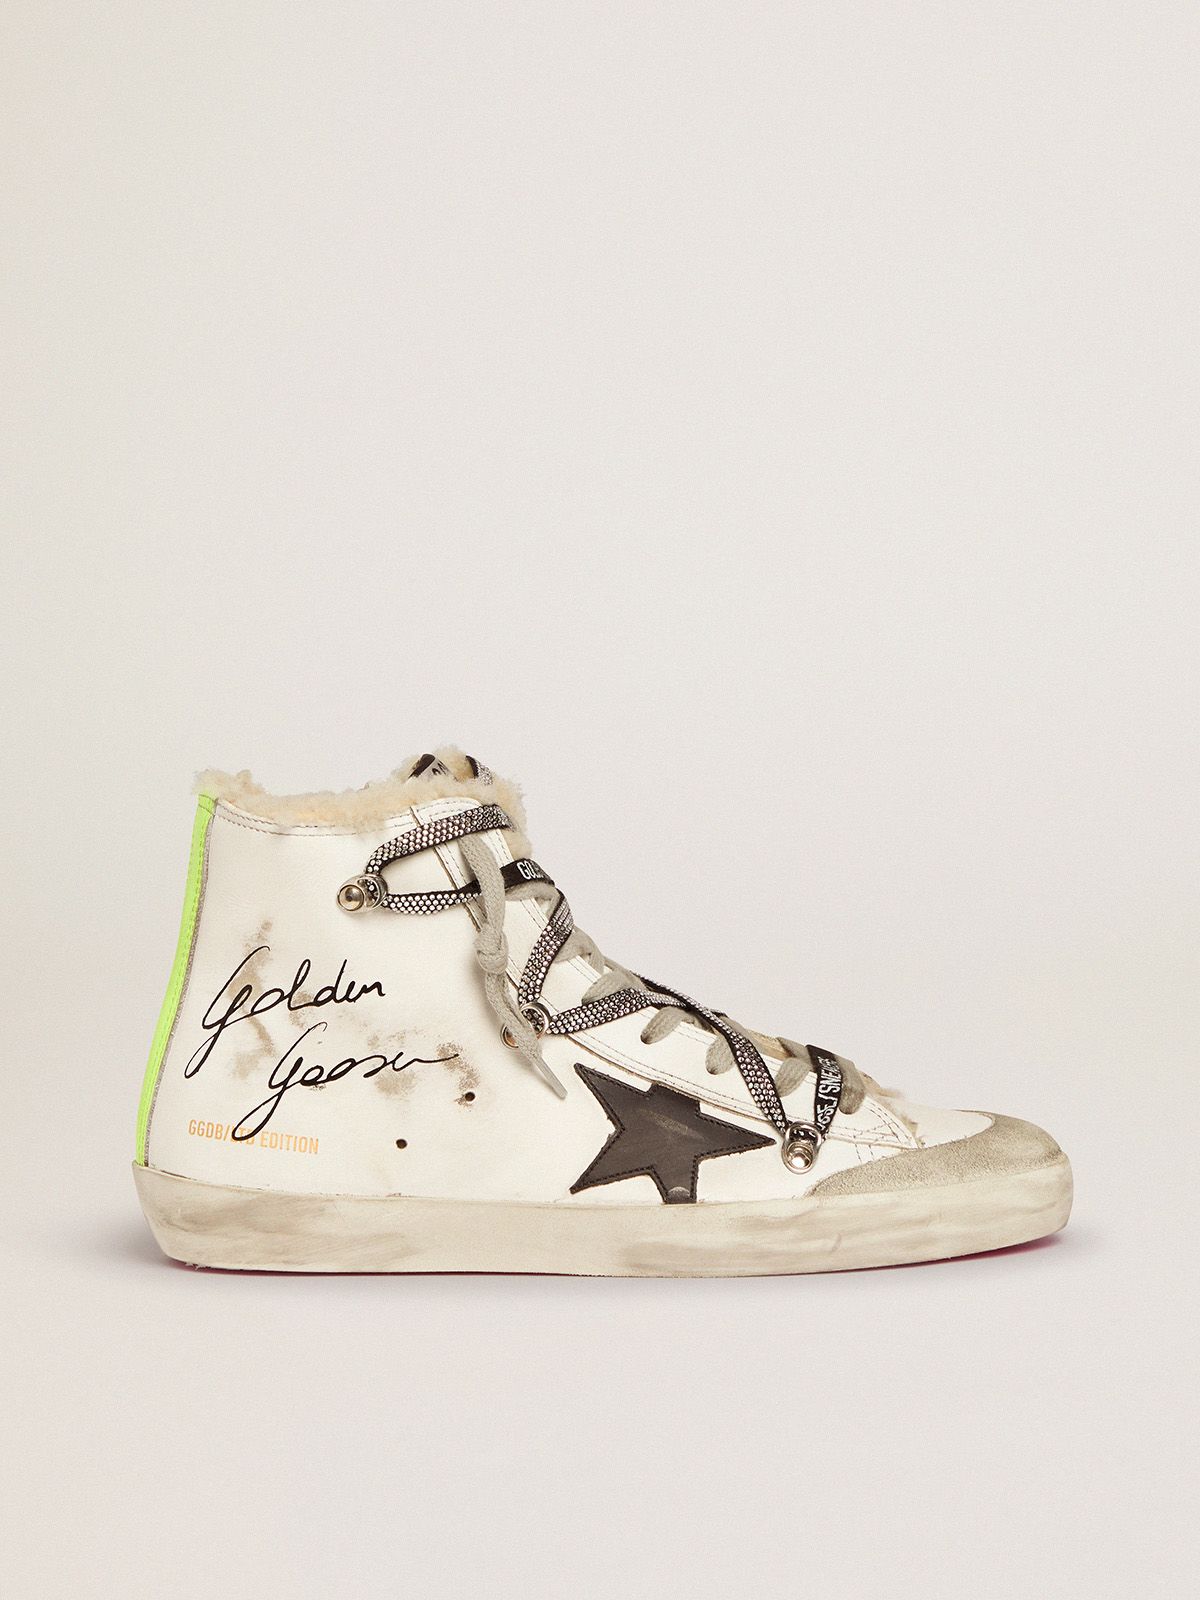 golden goose Francy shearling inserts black LAB with sneakers and star Penstar